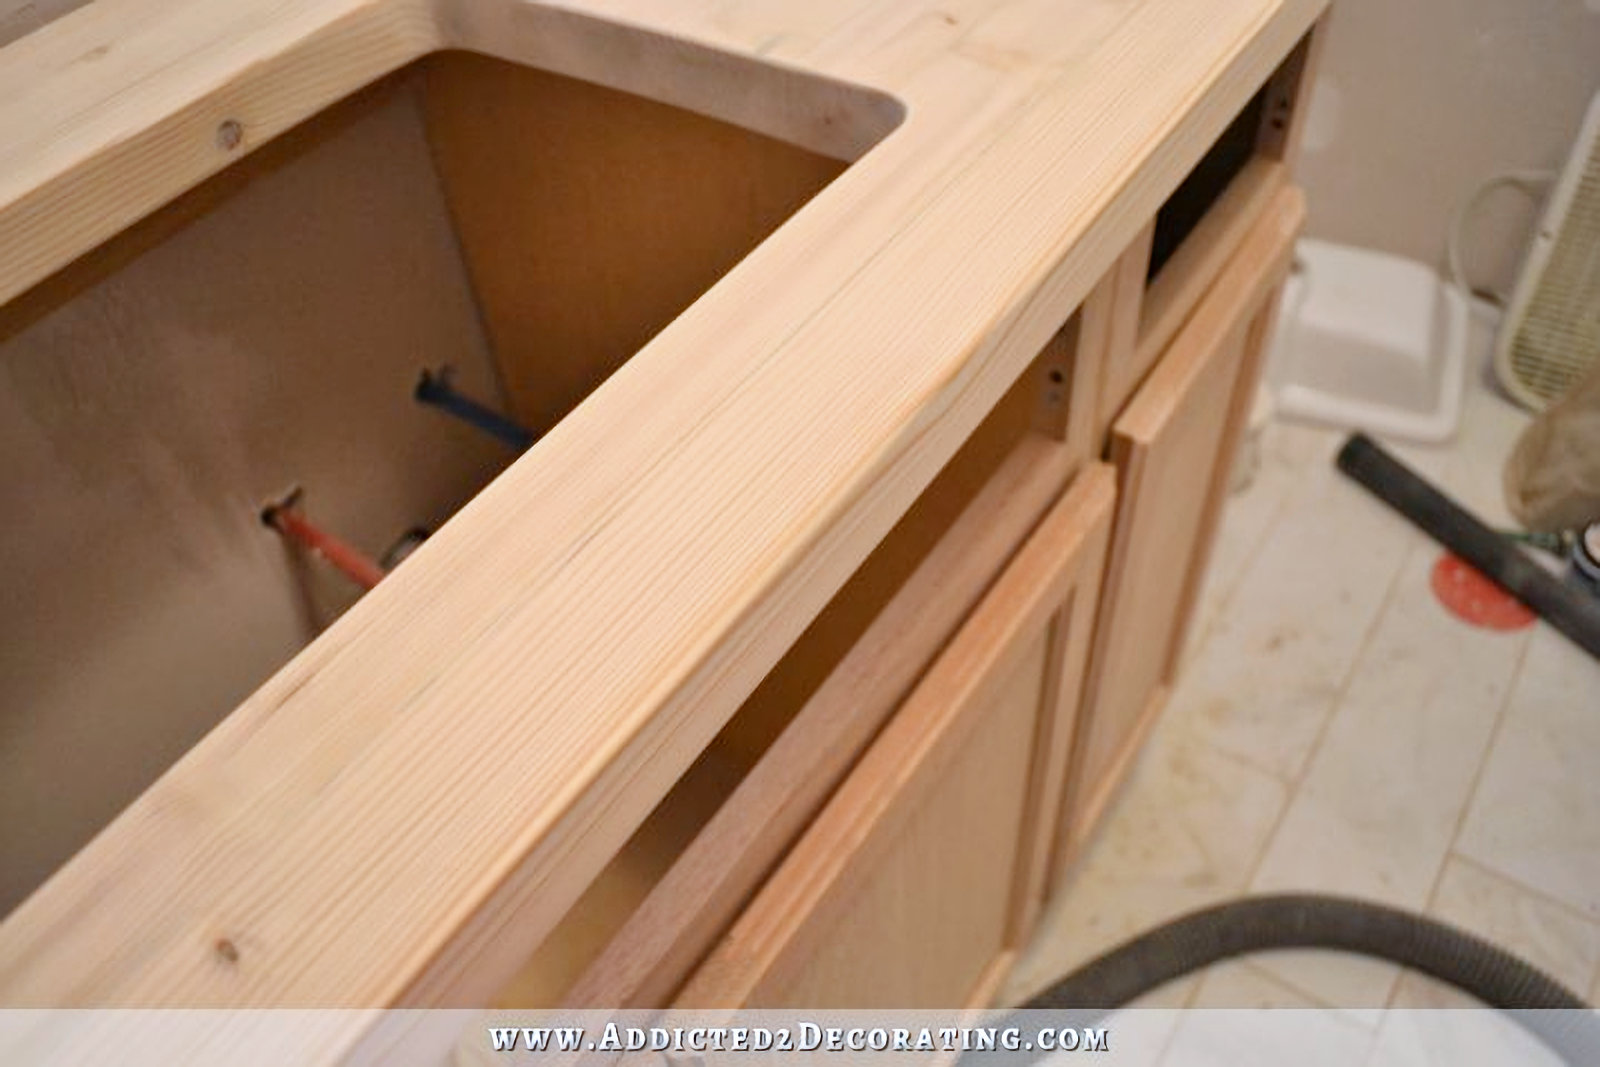 DIY butcherblock style countertop - close up view after wood filler and sanding